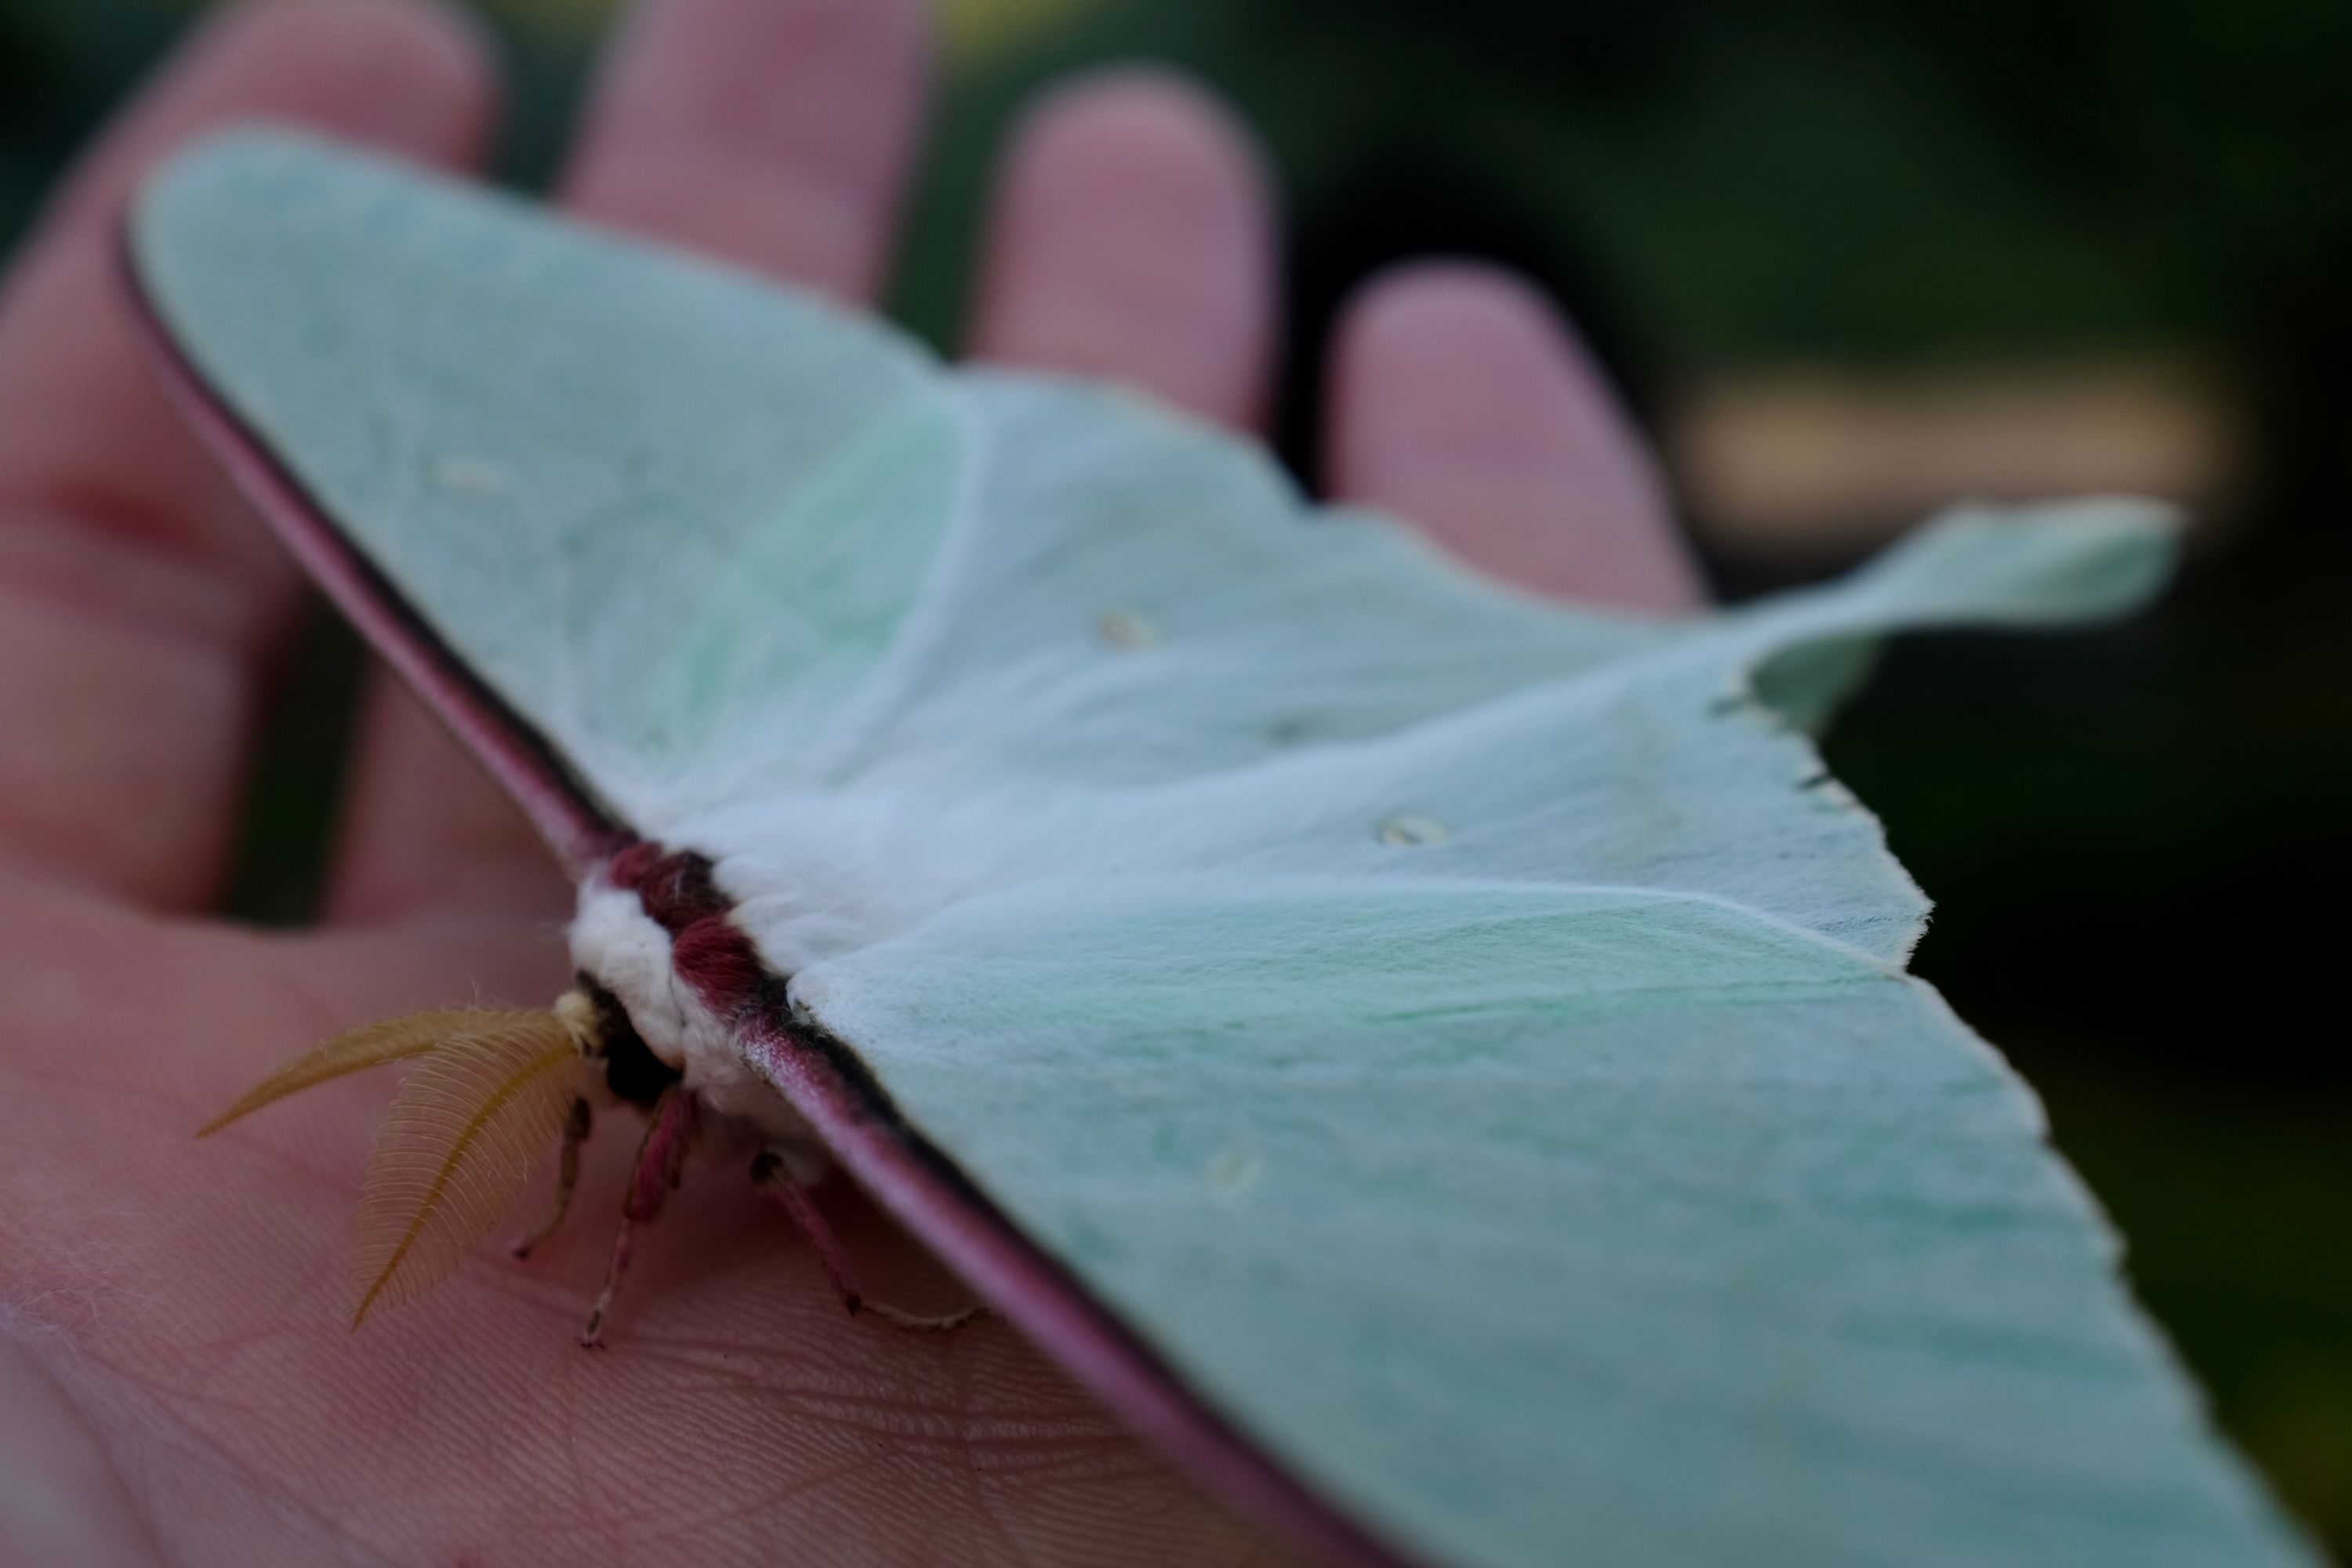 A Japanese moon moth rests on the author’s palm.